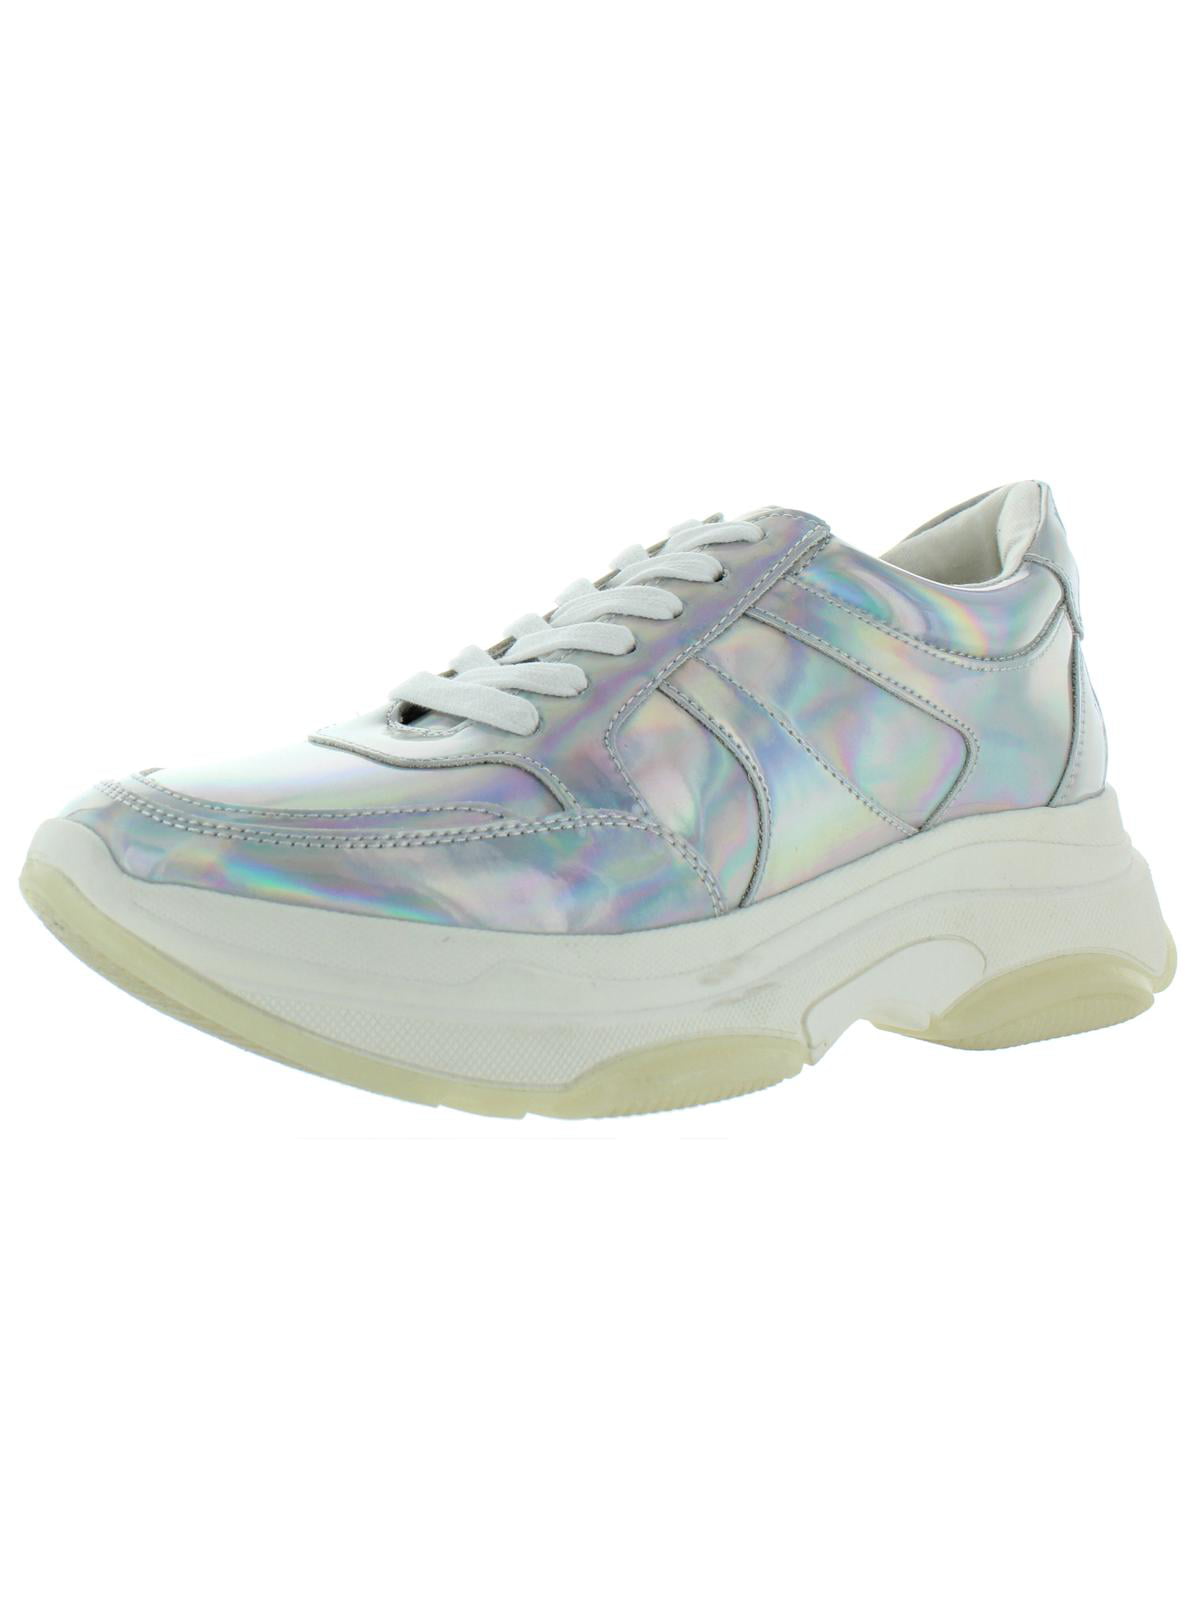 Chunky trainers - White/Holographic - Kids | H&M IN